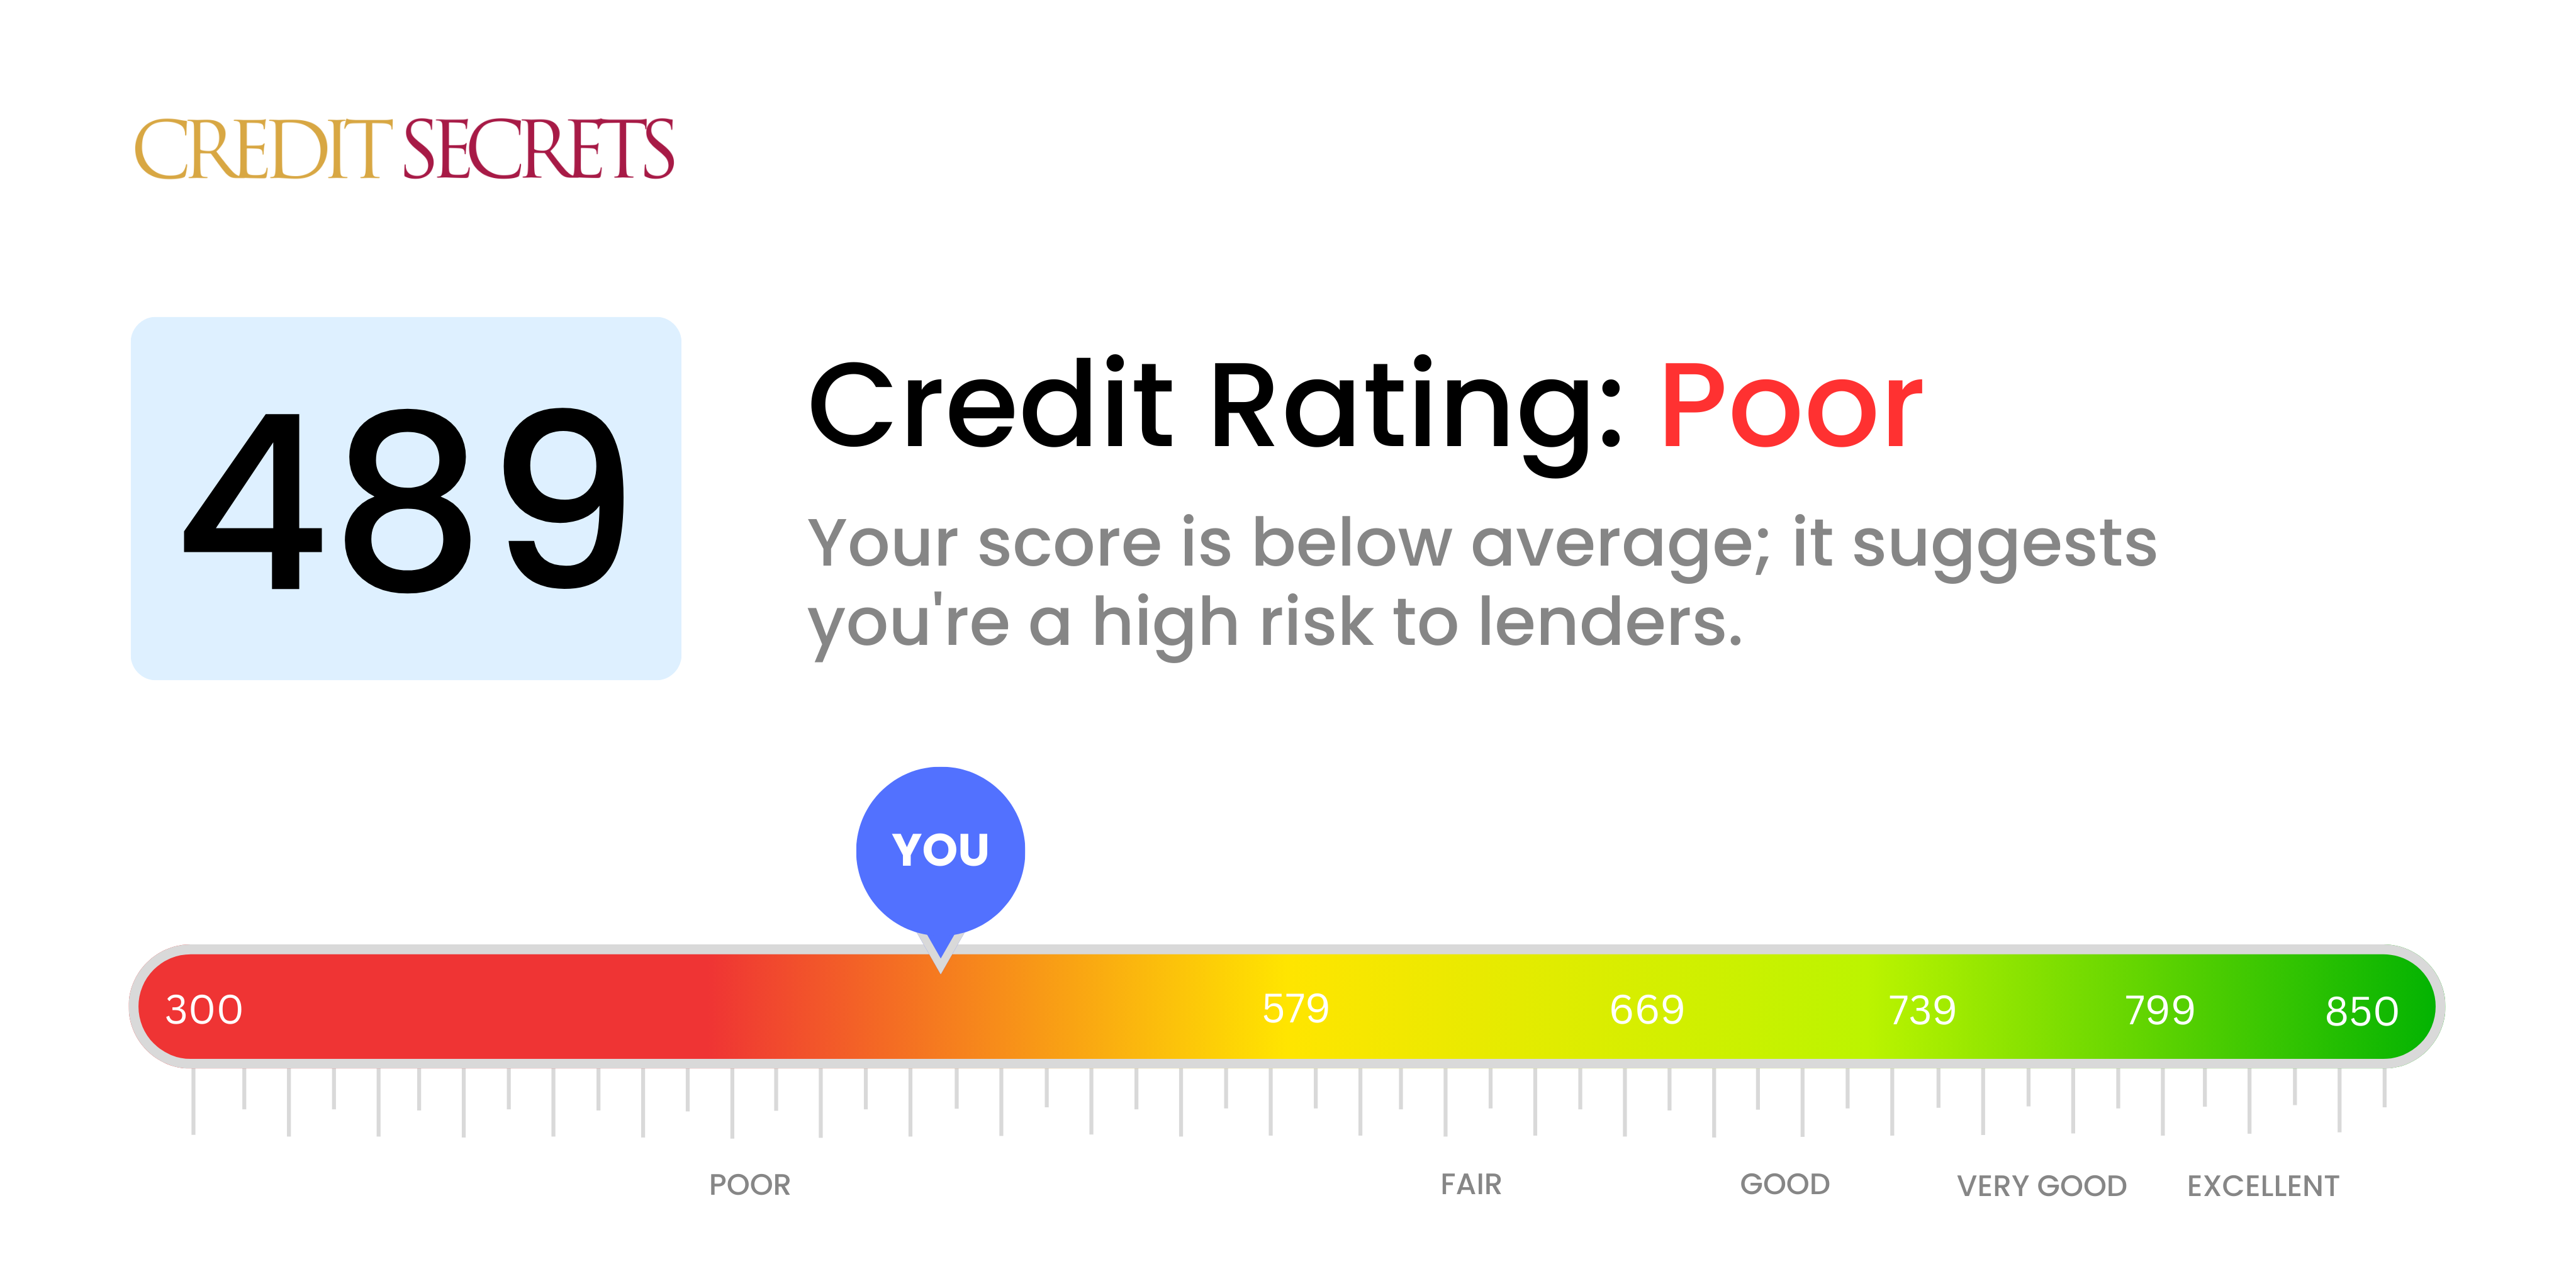 Is 489 a good credit score?